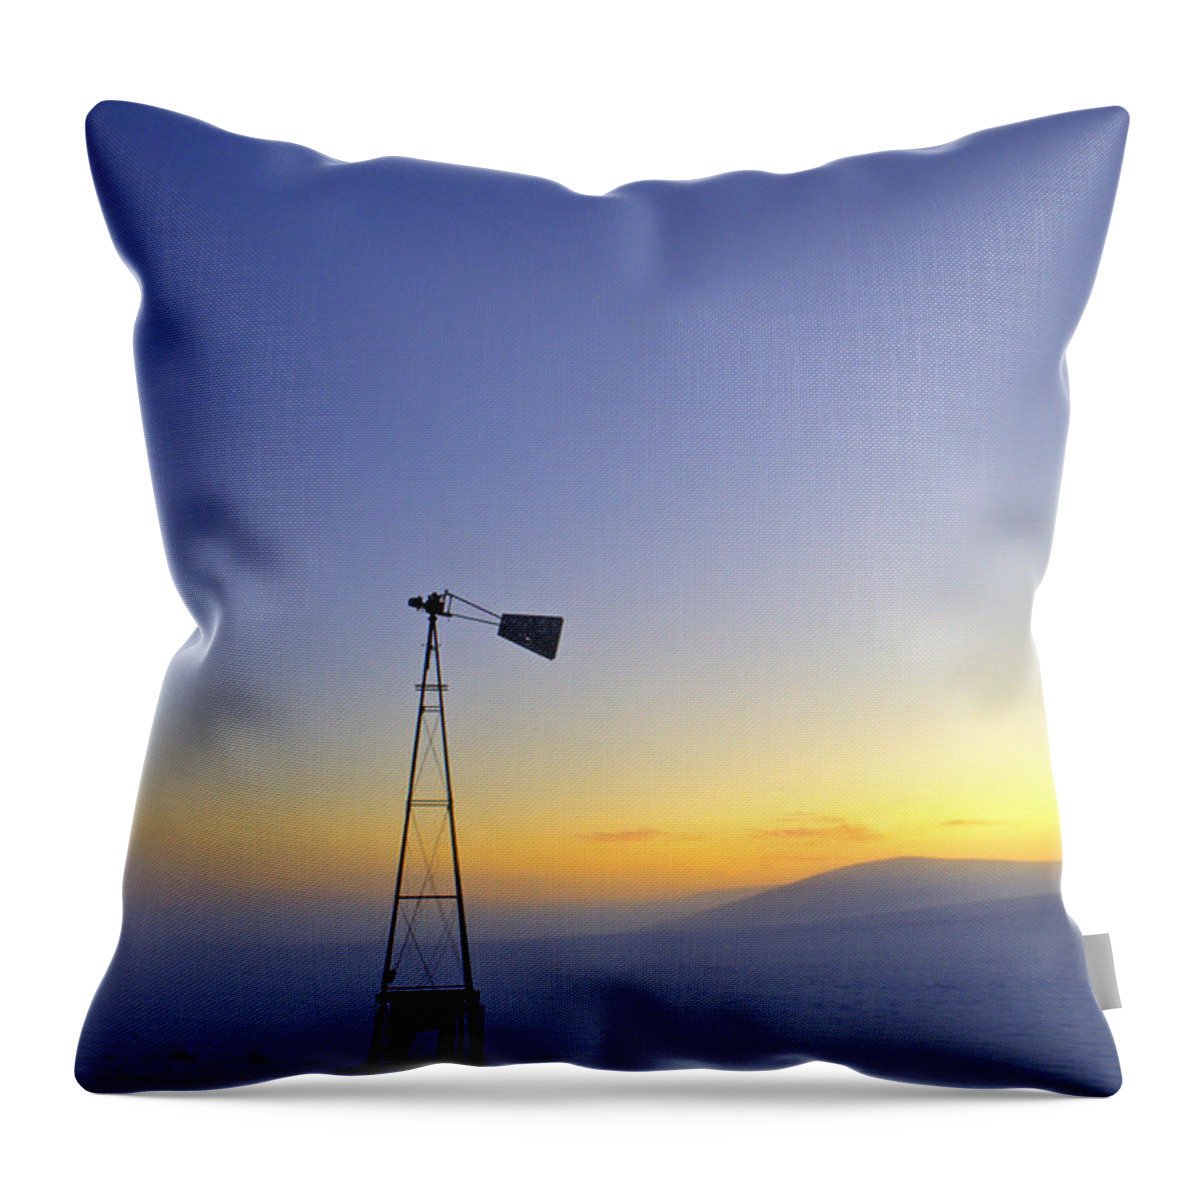 Outdoors Throw Pillow featuring the photograph Windmill Winter Sunset by Doug Davidson